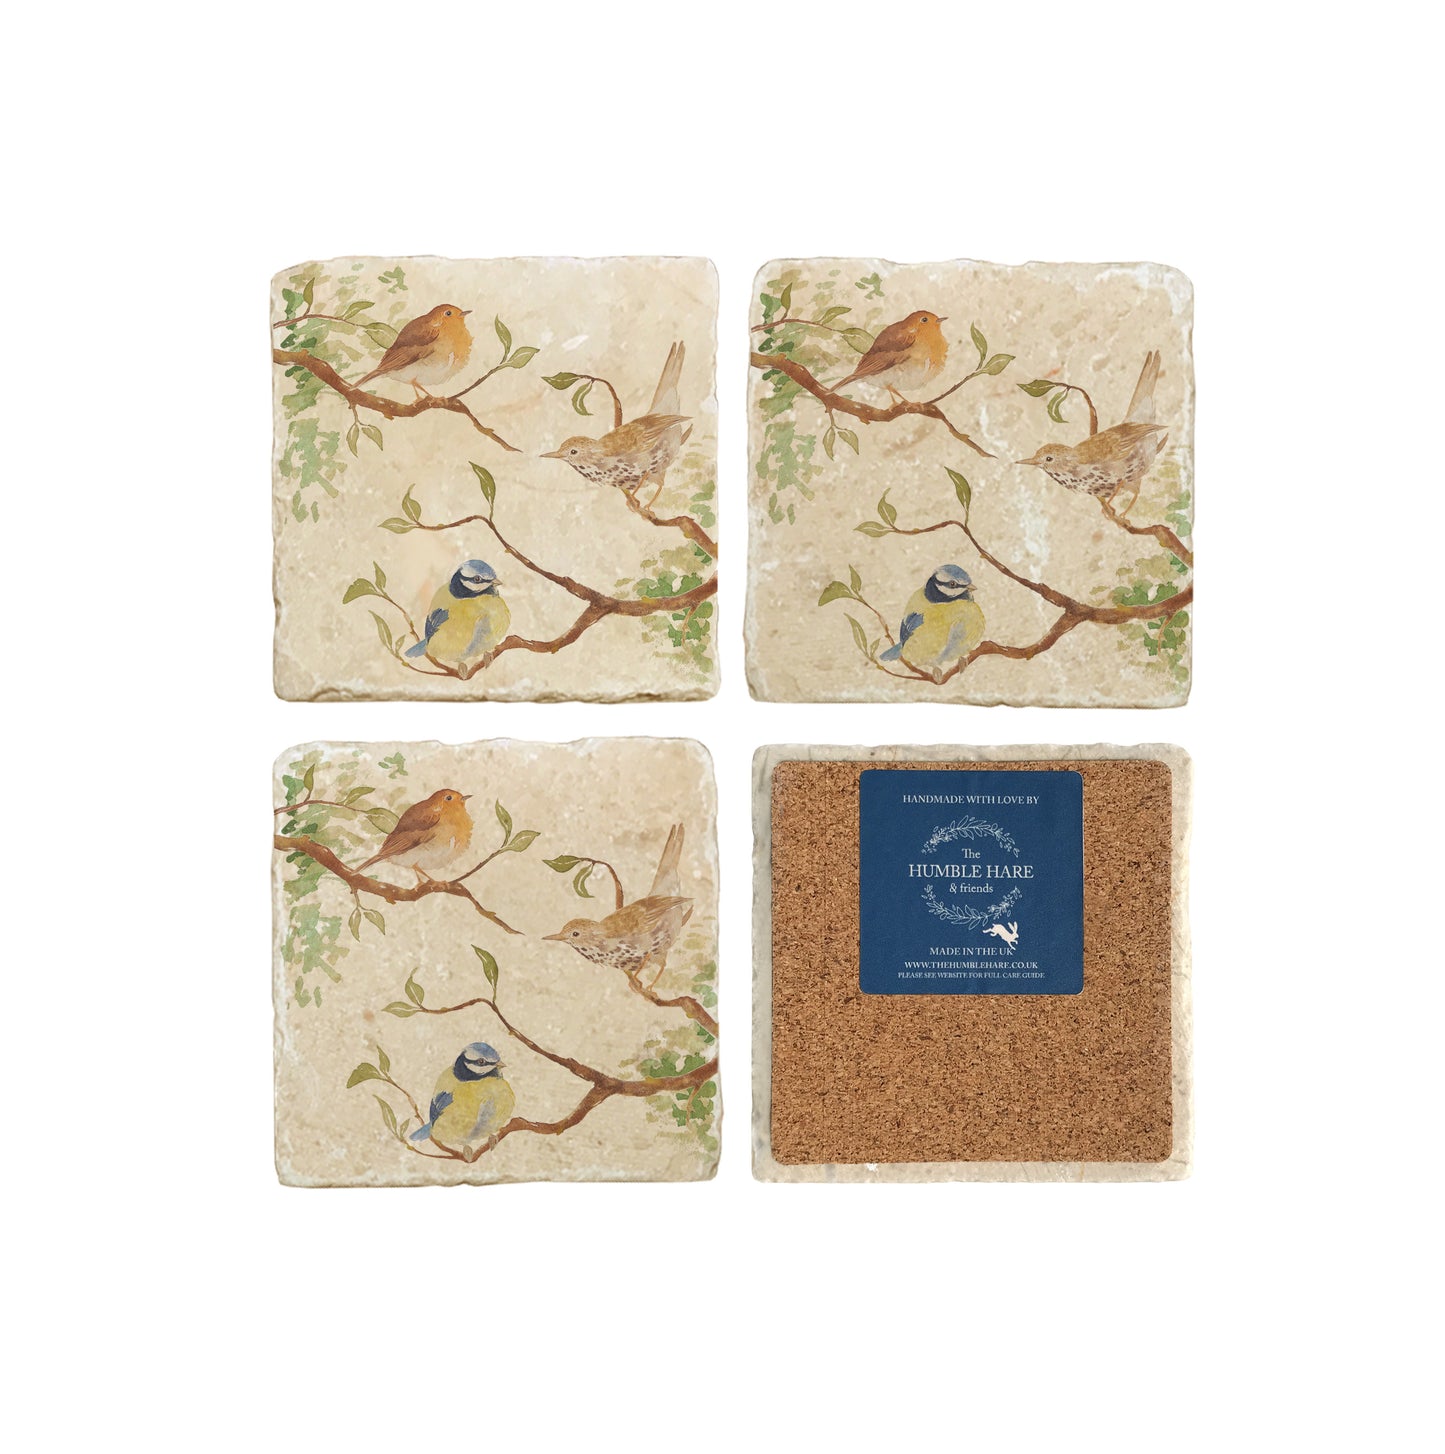 A set of four square marble coasters, featuring a watercolour design of British garden birds in the hedgerow around the paddock gate. One coaster is flipped to show that the coasters are backed with cork.